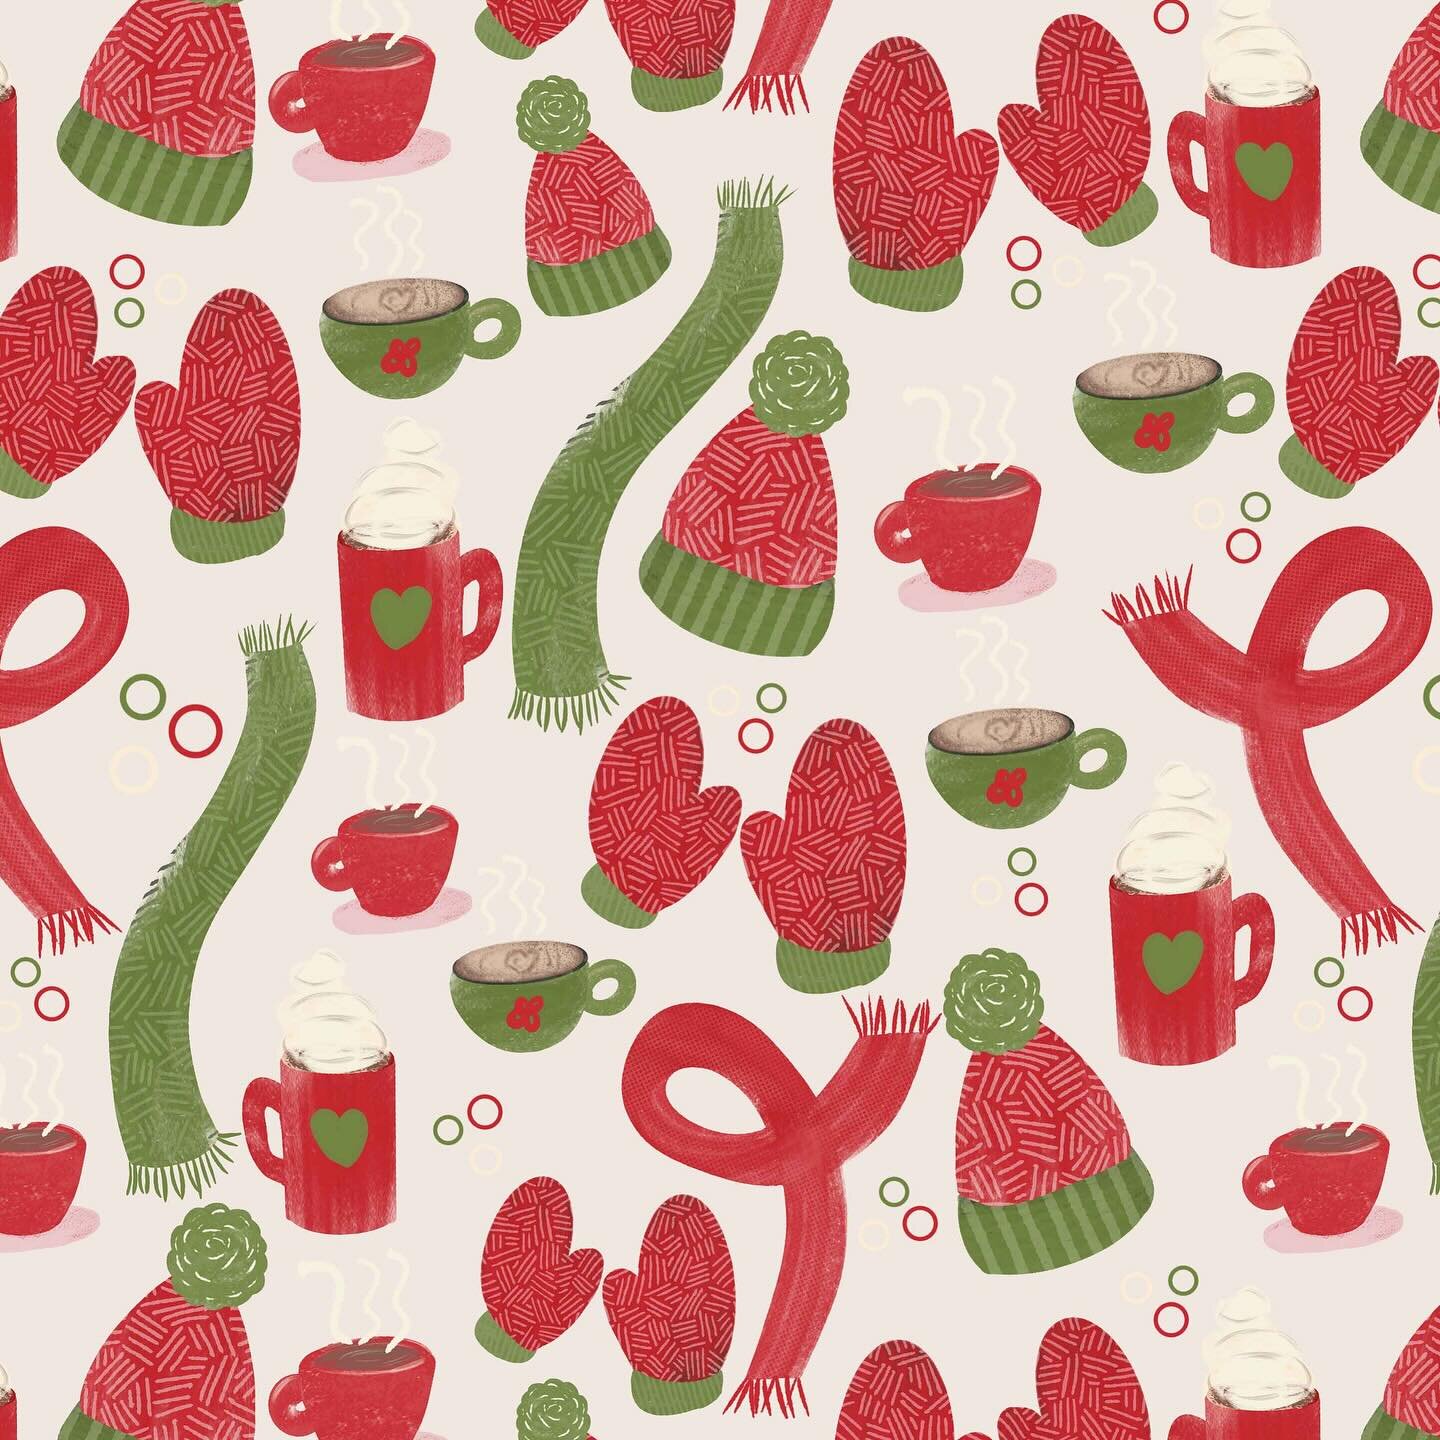 This would make cute wrapping paper swipe to see a mockup! Cozy Christmas, #3x3designchallenge hosted by @sketchdesignrepeat
#sketchdesignrepeat #christmaspattern #christmasillustration #christmasfabric #textiledesign #fabricdesign #christmasprint #p